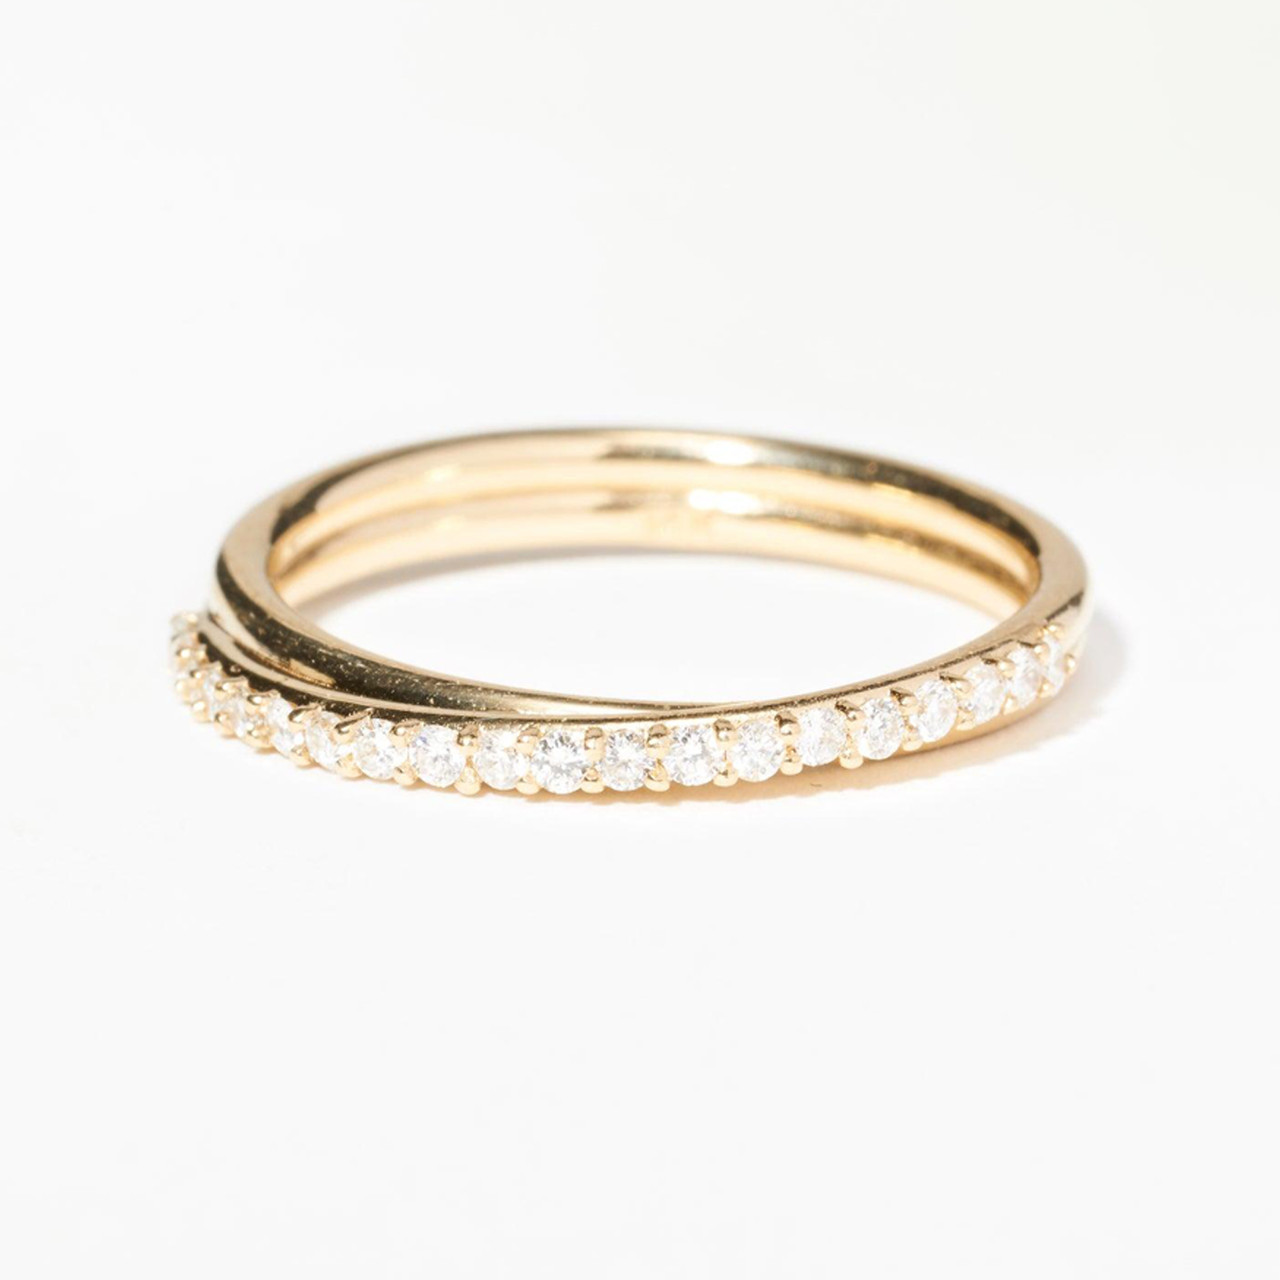 Small Demi-Pave Current Ring, WWAKE, tomfoolery